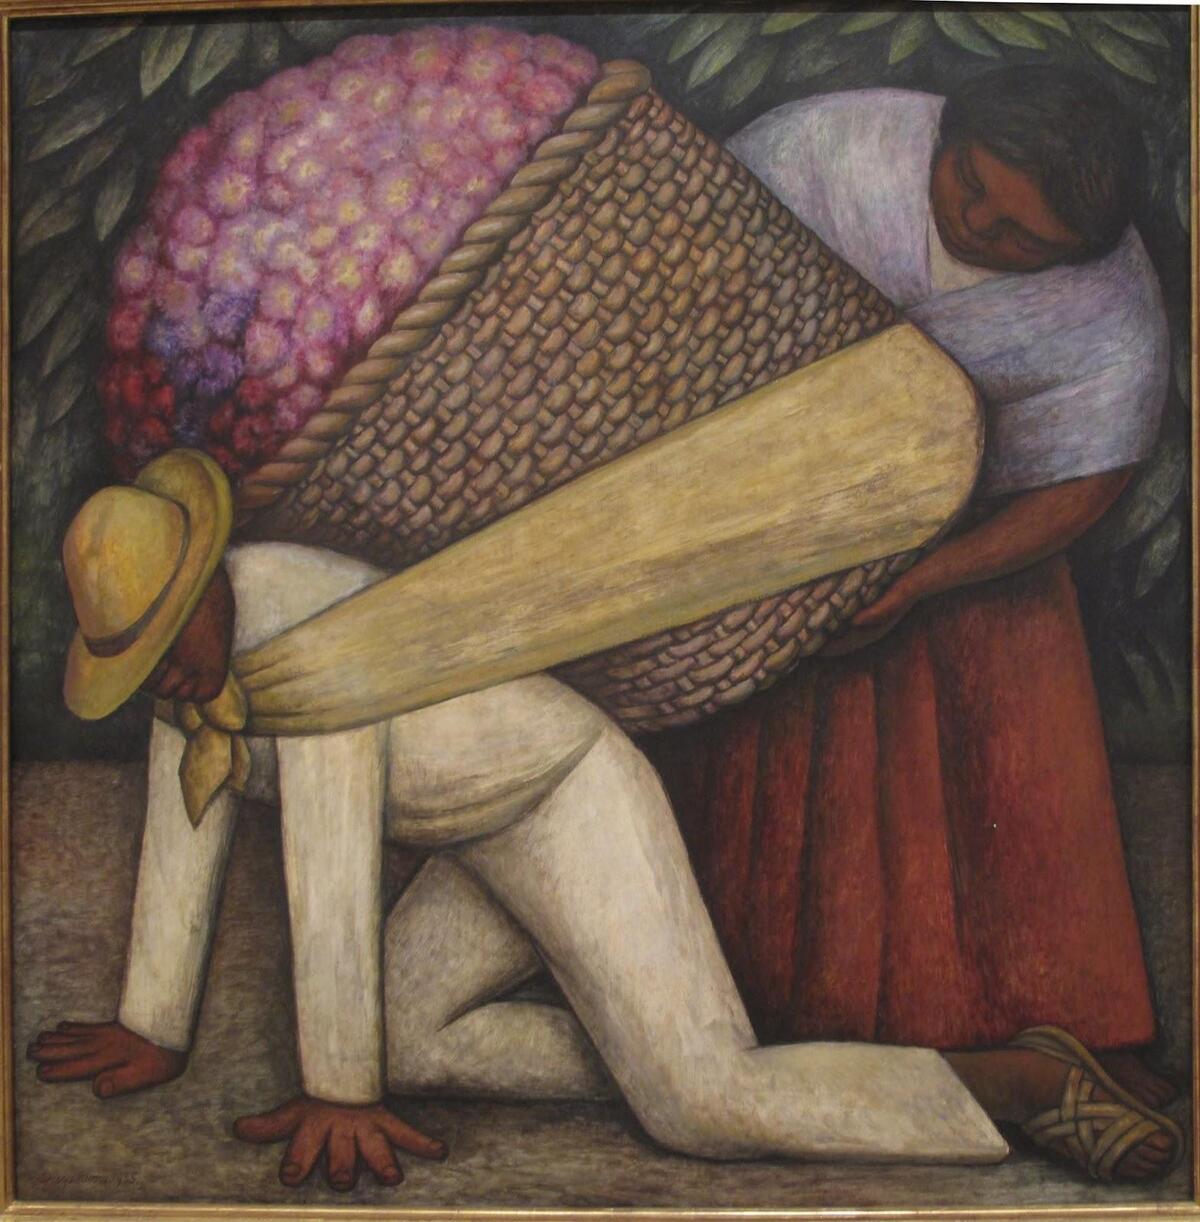 image of Diego Rivera's The Flower Carrier, 1935